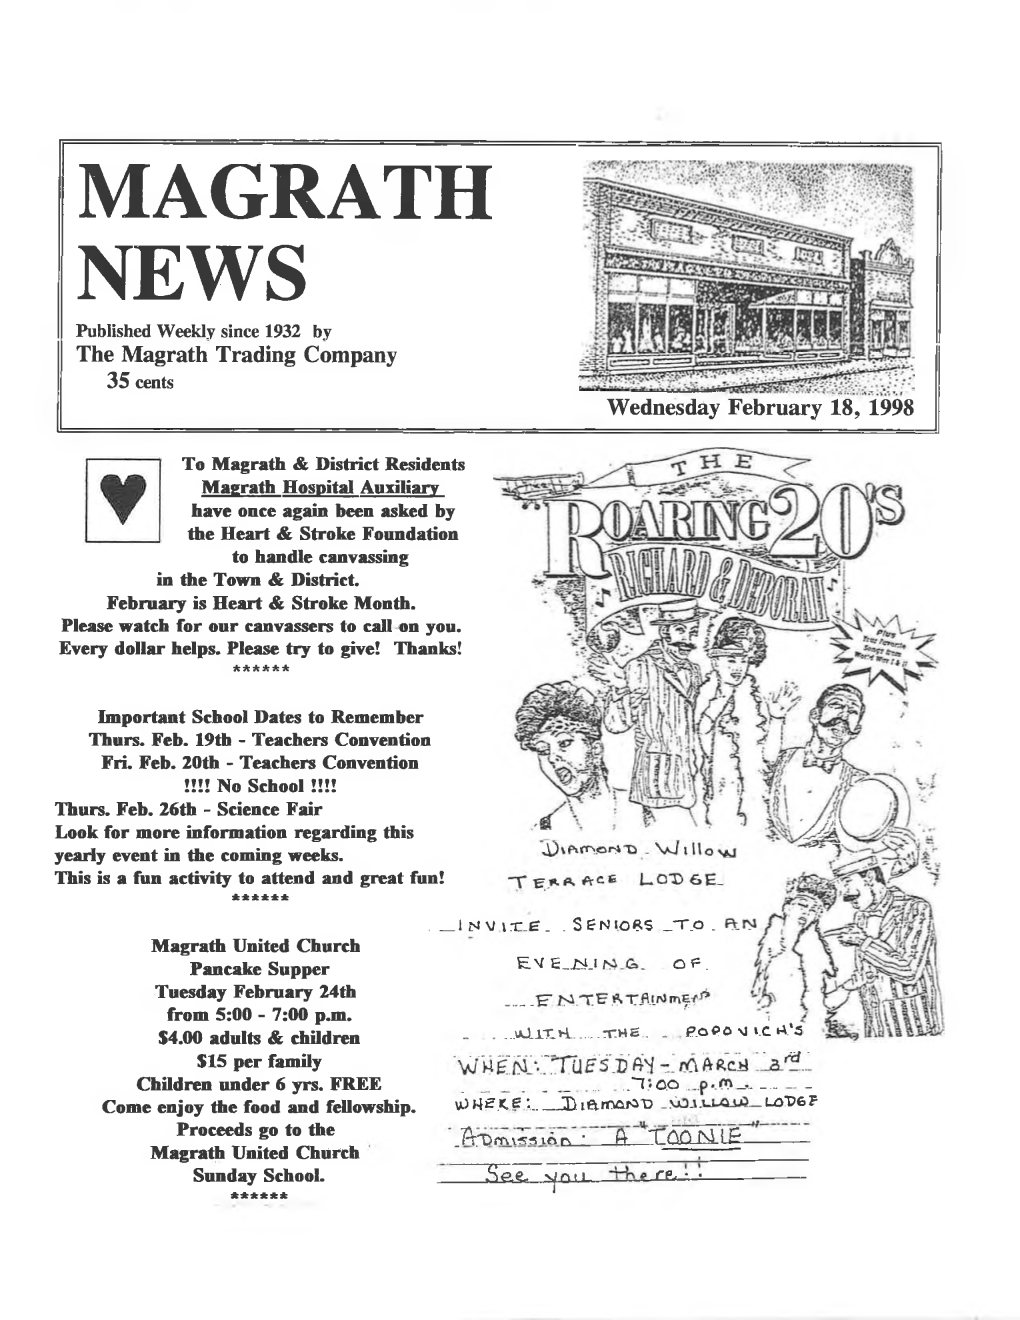 MAGRATH NEWS Published Weekly Since 1932 by the Magrath Trading Company 35 Cents Wednesday February 18, 1998